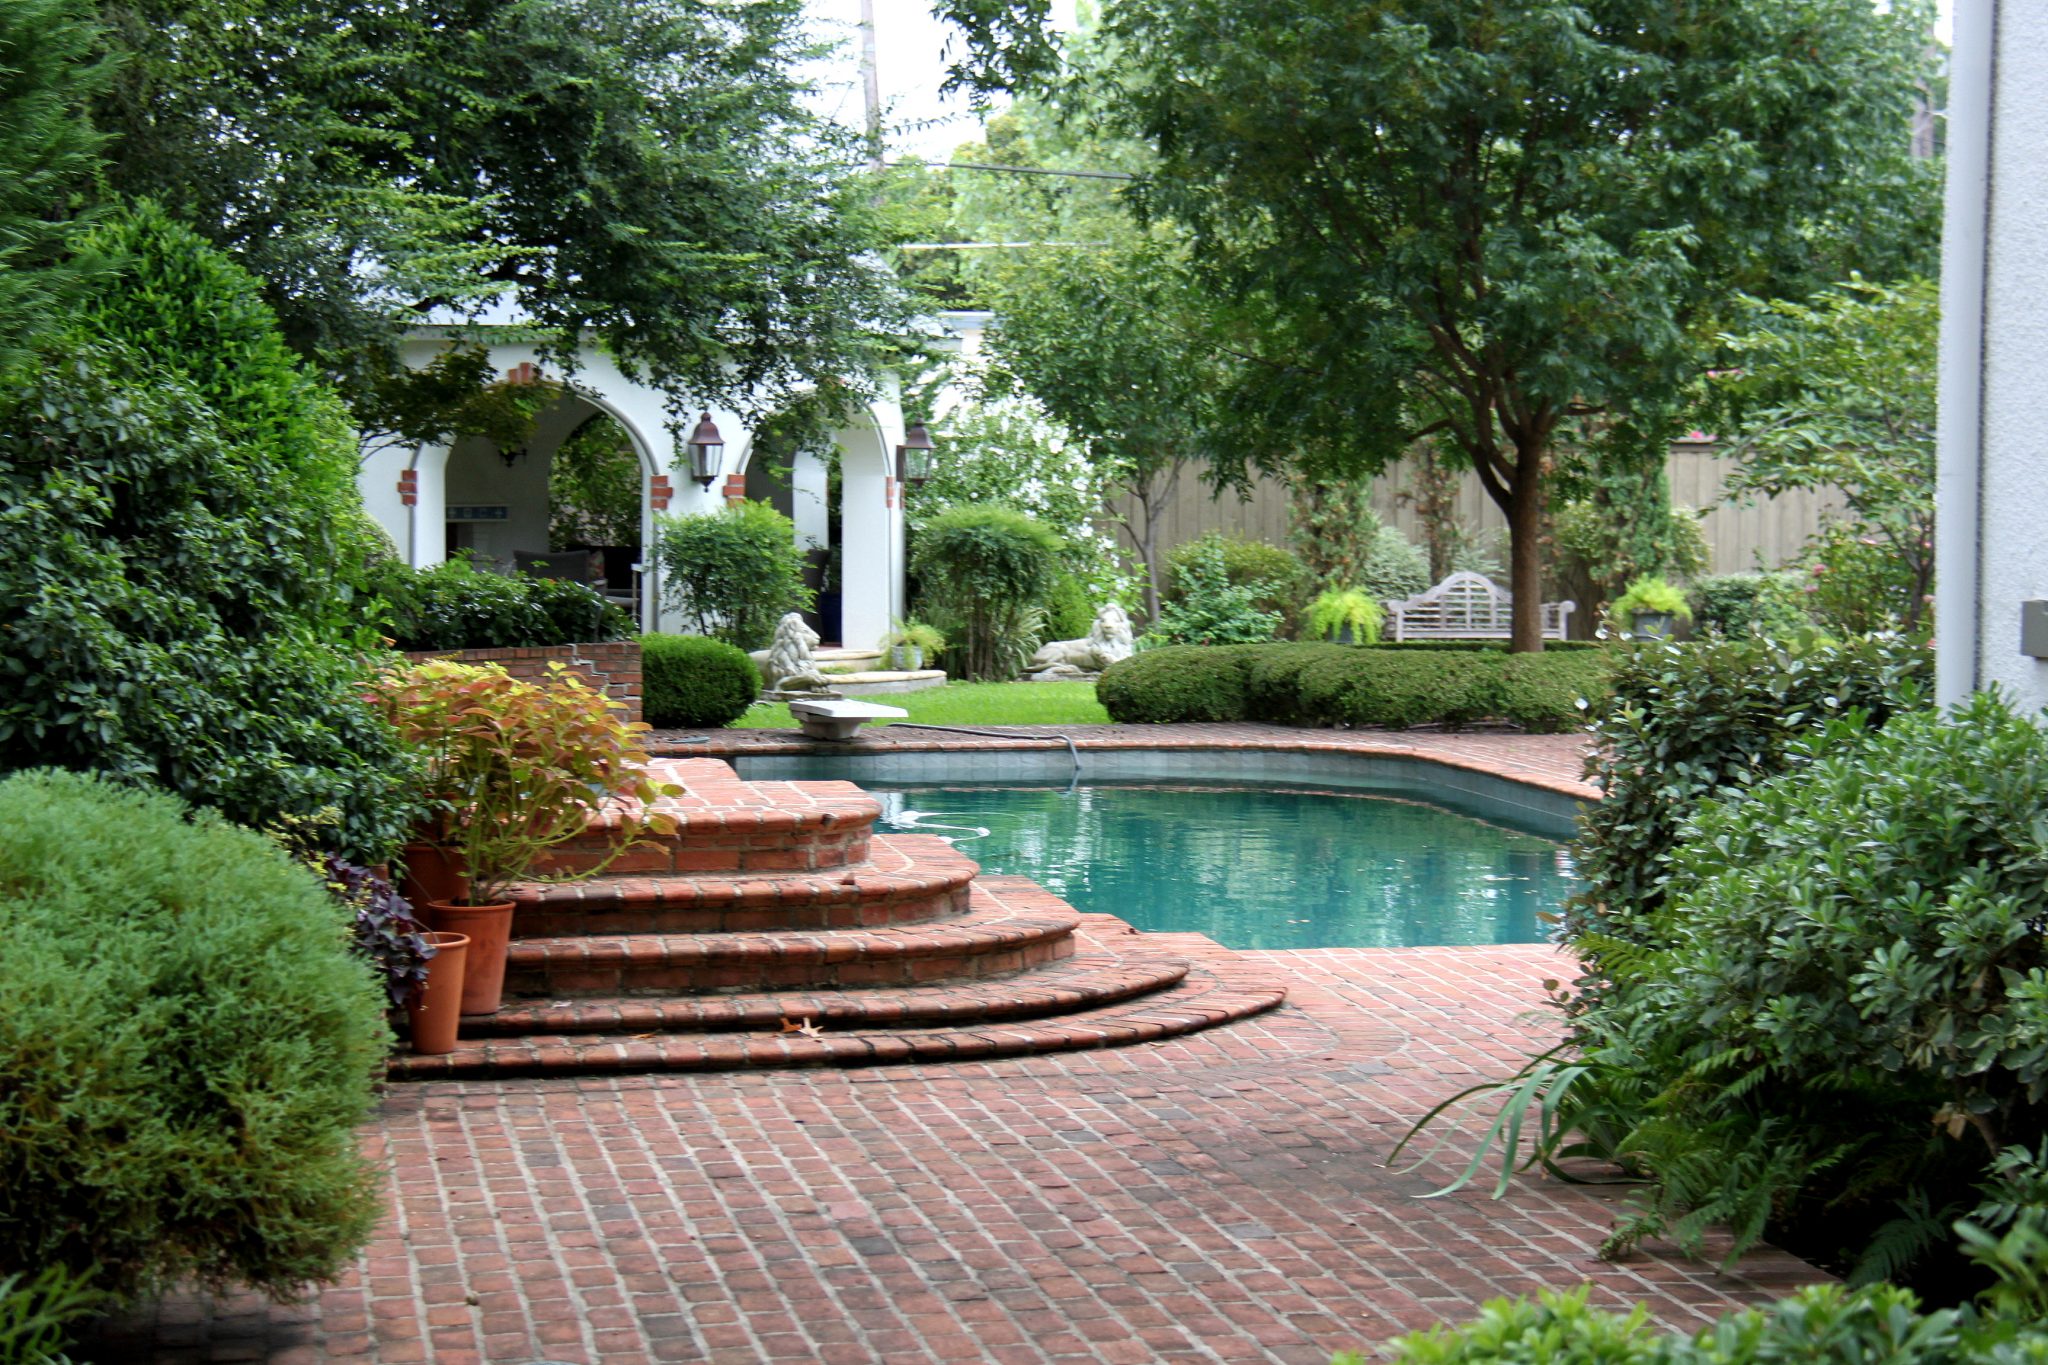 The Fall Garden Tour features beautiful gardens all over the city, including Lakewood and East Dallas. 